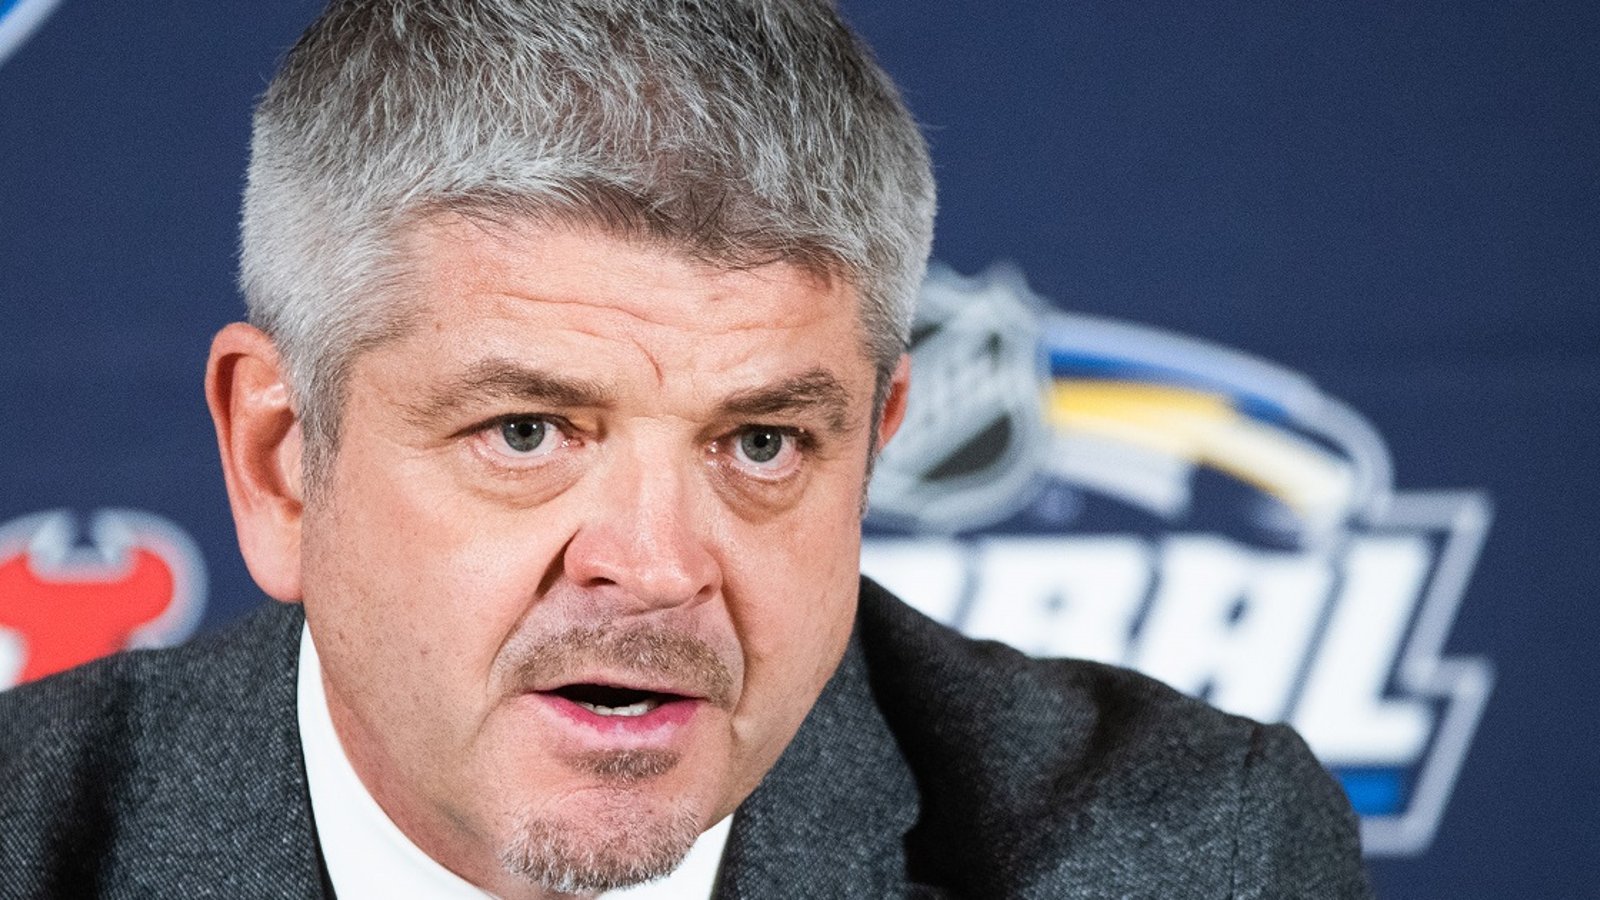 Todd McLellan calls out his own players, says some do not belong in the NHL.